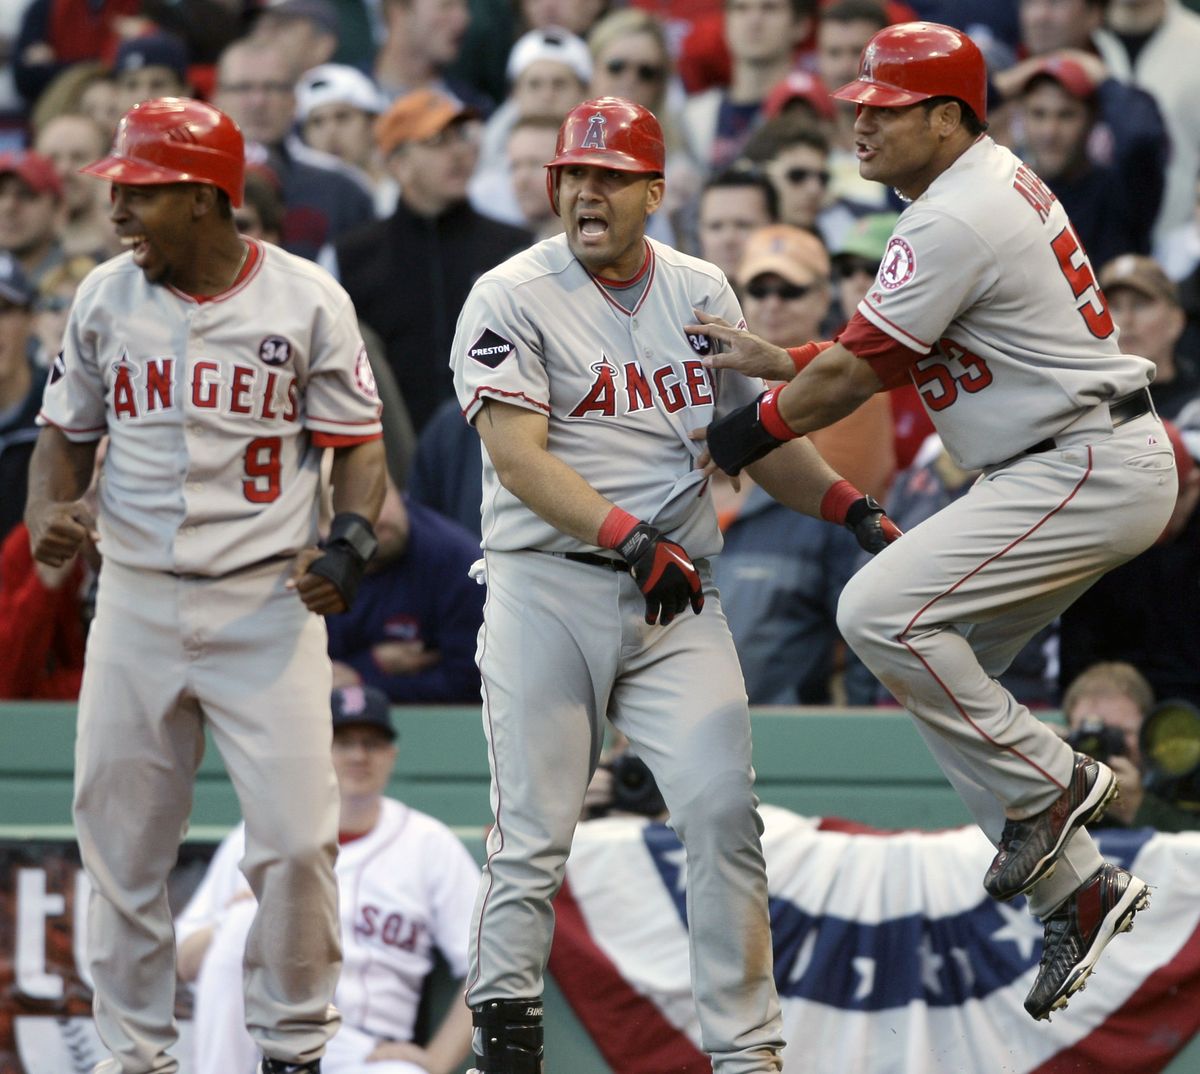 Los Angeles’ Bobby Abreu, right, celebrates with Chone Figgins, left, and Kendry Morales after Abreu and Figgins scored in the ninth inning for a 7-6 lead. (Associated Press / The Spokesman-Review)